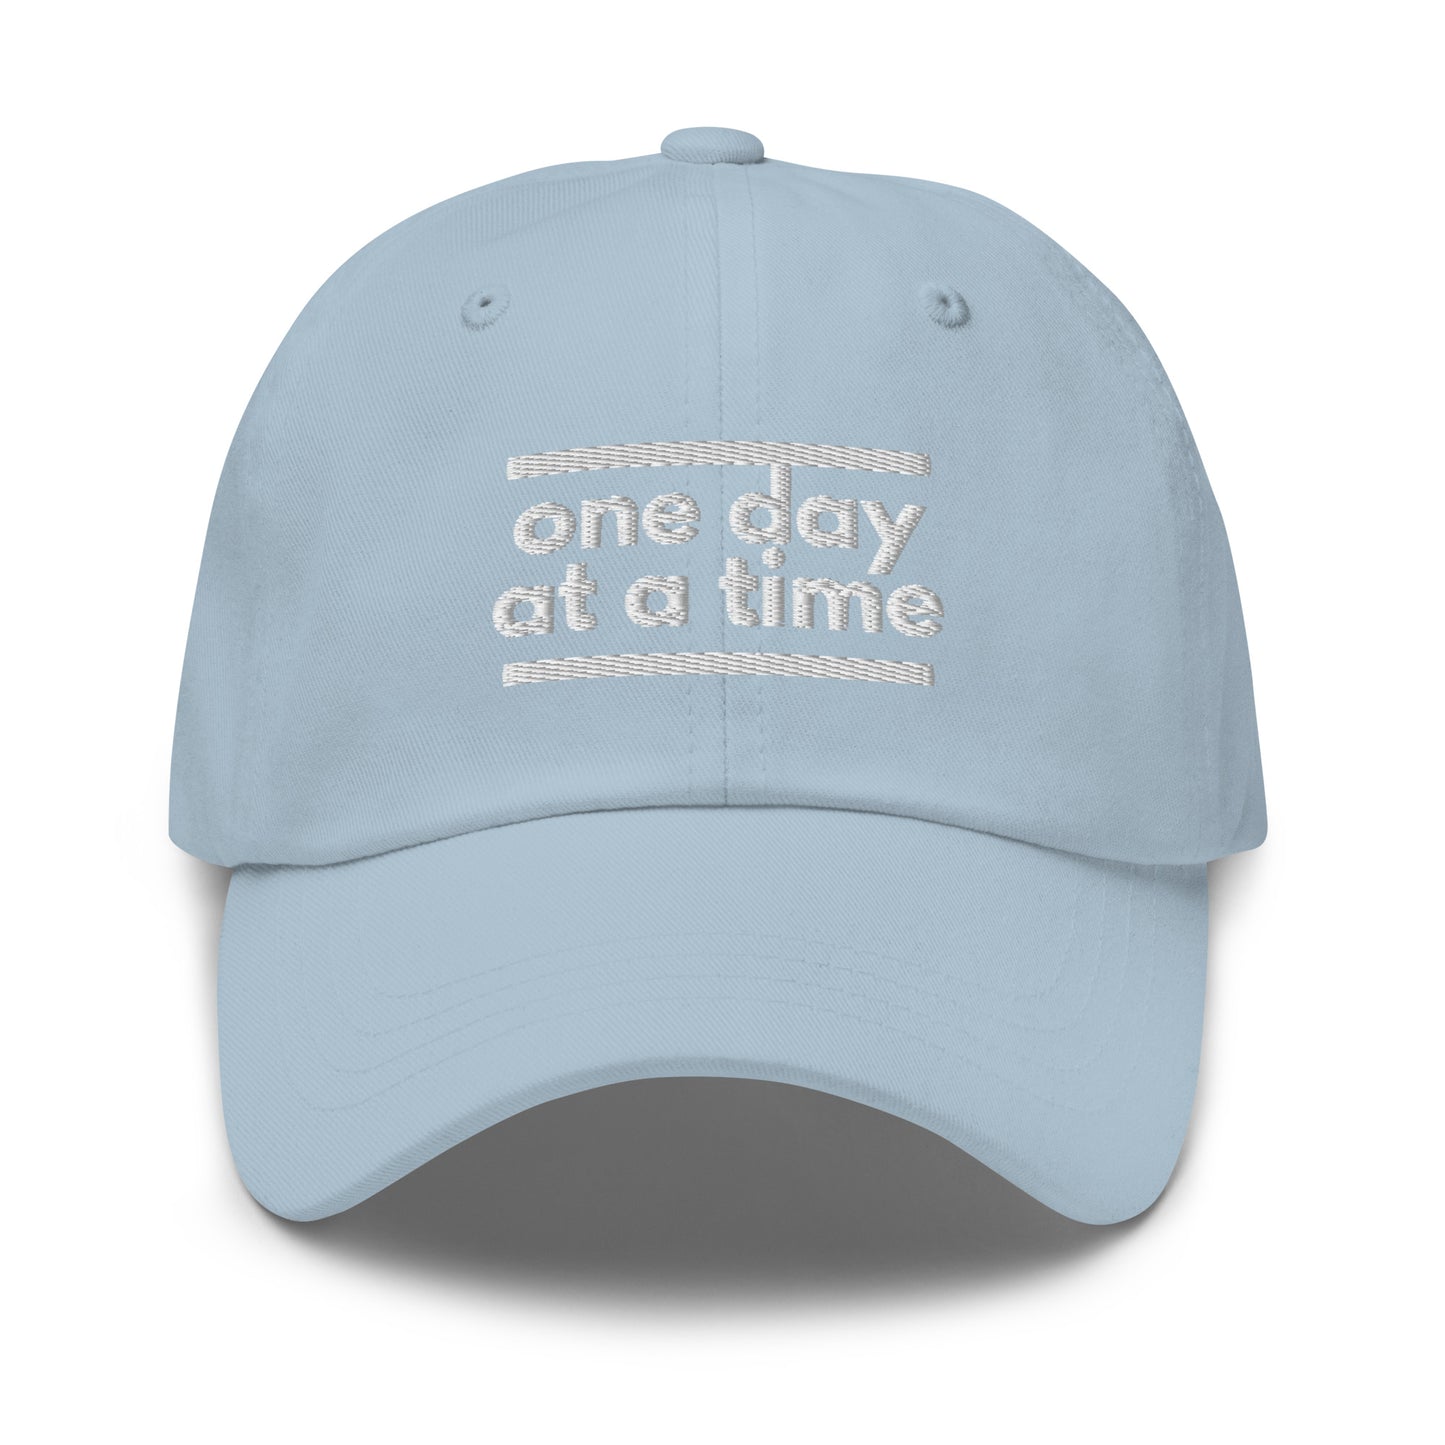 One Day At A Time Hat